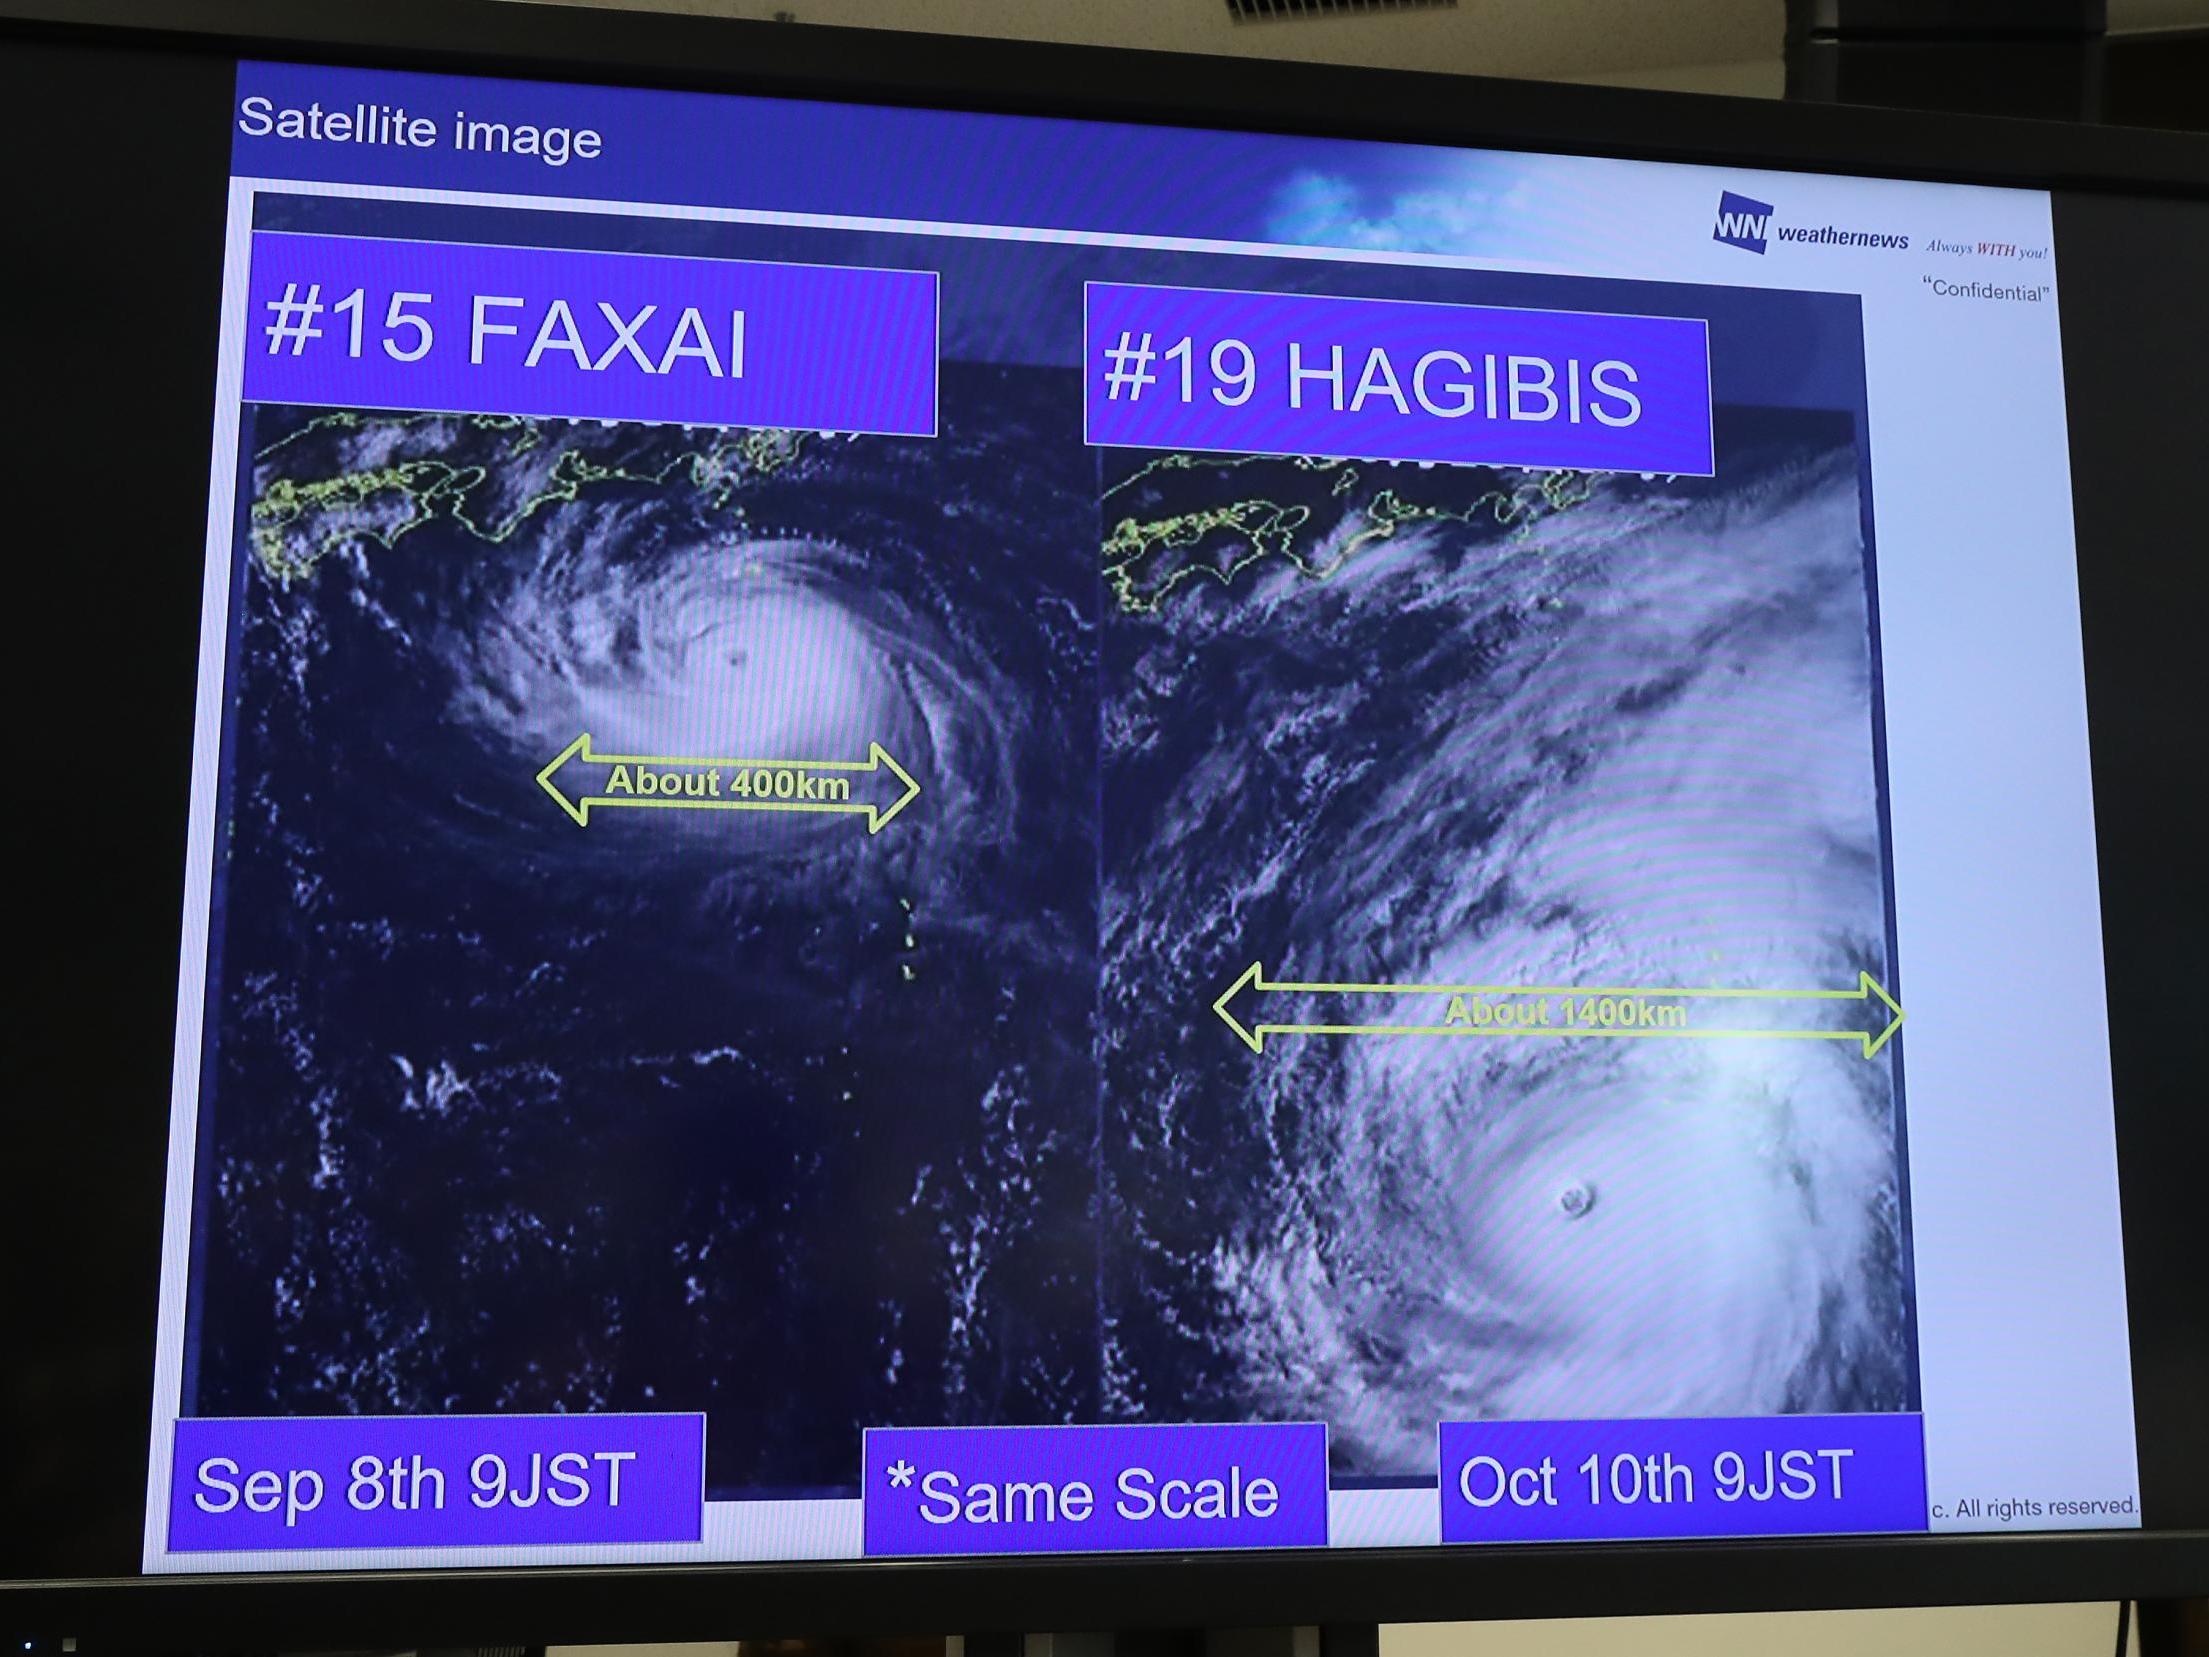 Hagibis is being measured as 1,000km bigger than last month's Typhoon Faxai